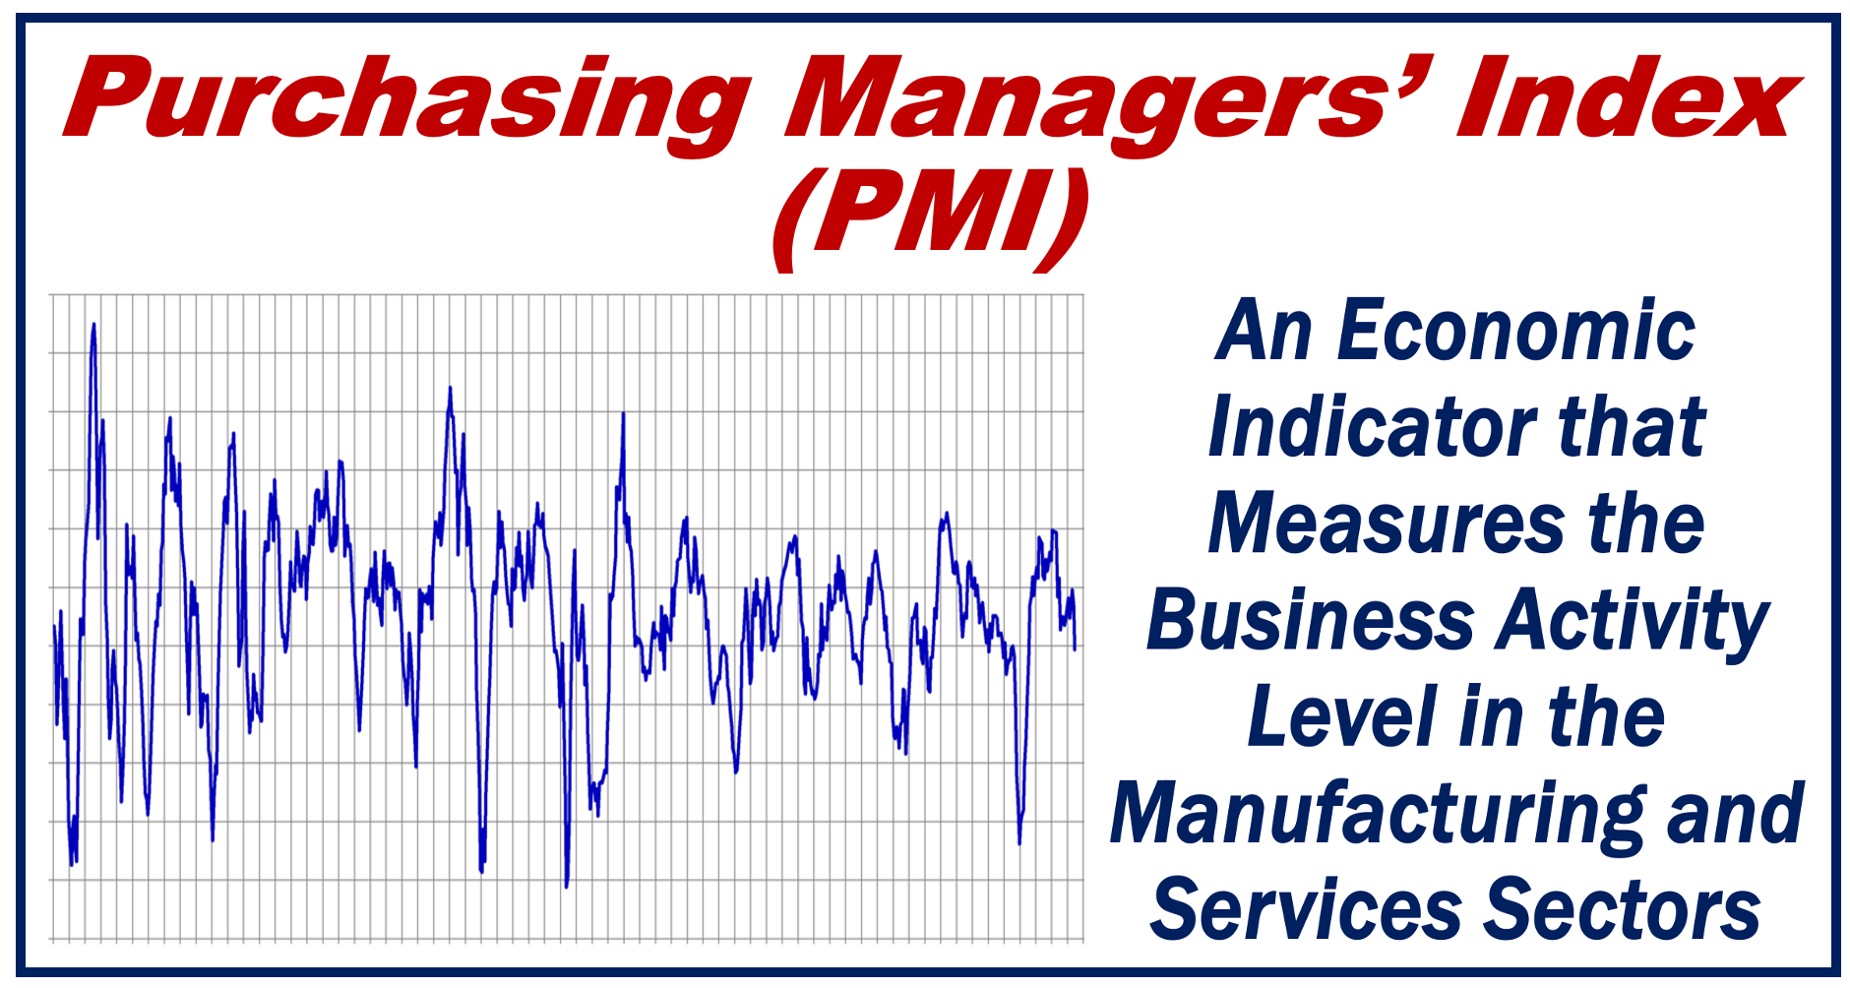 An image with a graph and a definition of the Purchasing Managers’ Index or PMI